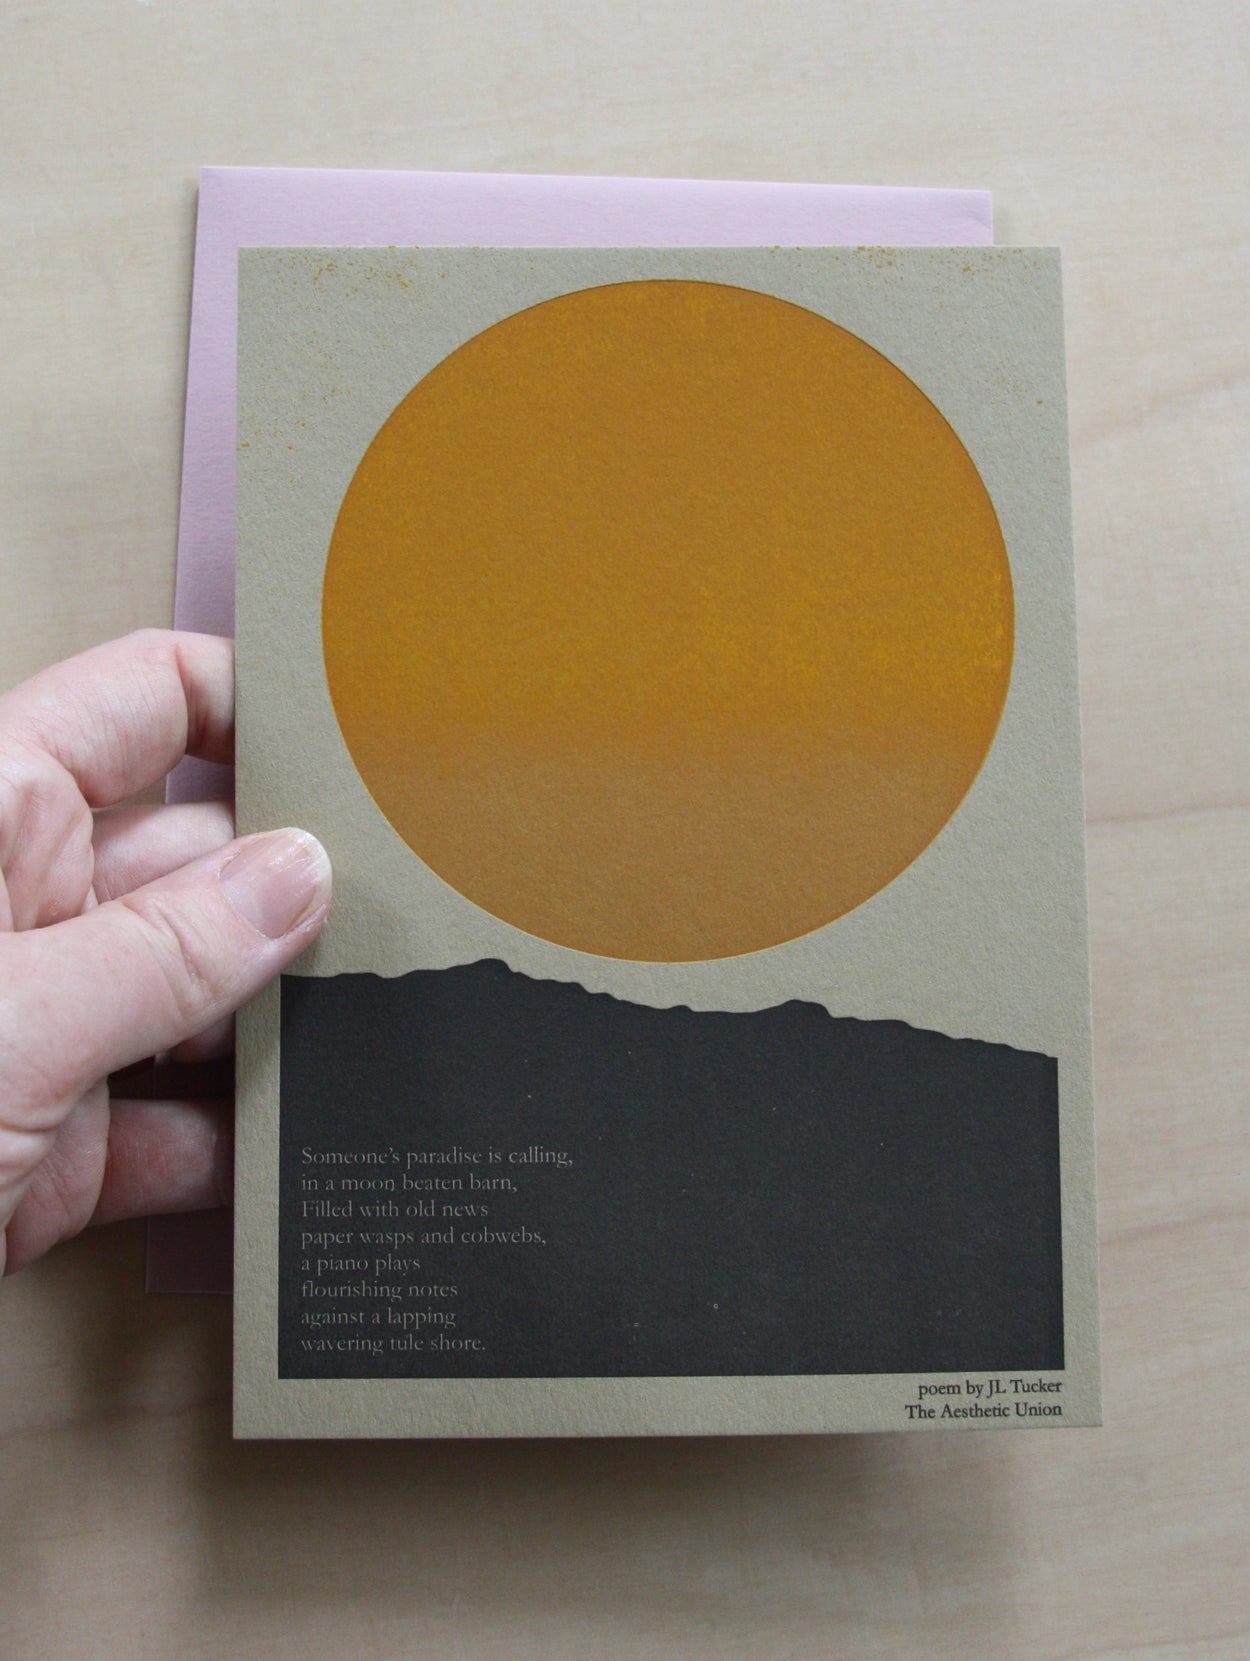 Hand holding Hand printed greeting card with yellow sun and poetry note